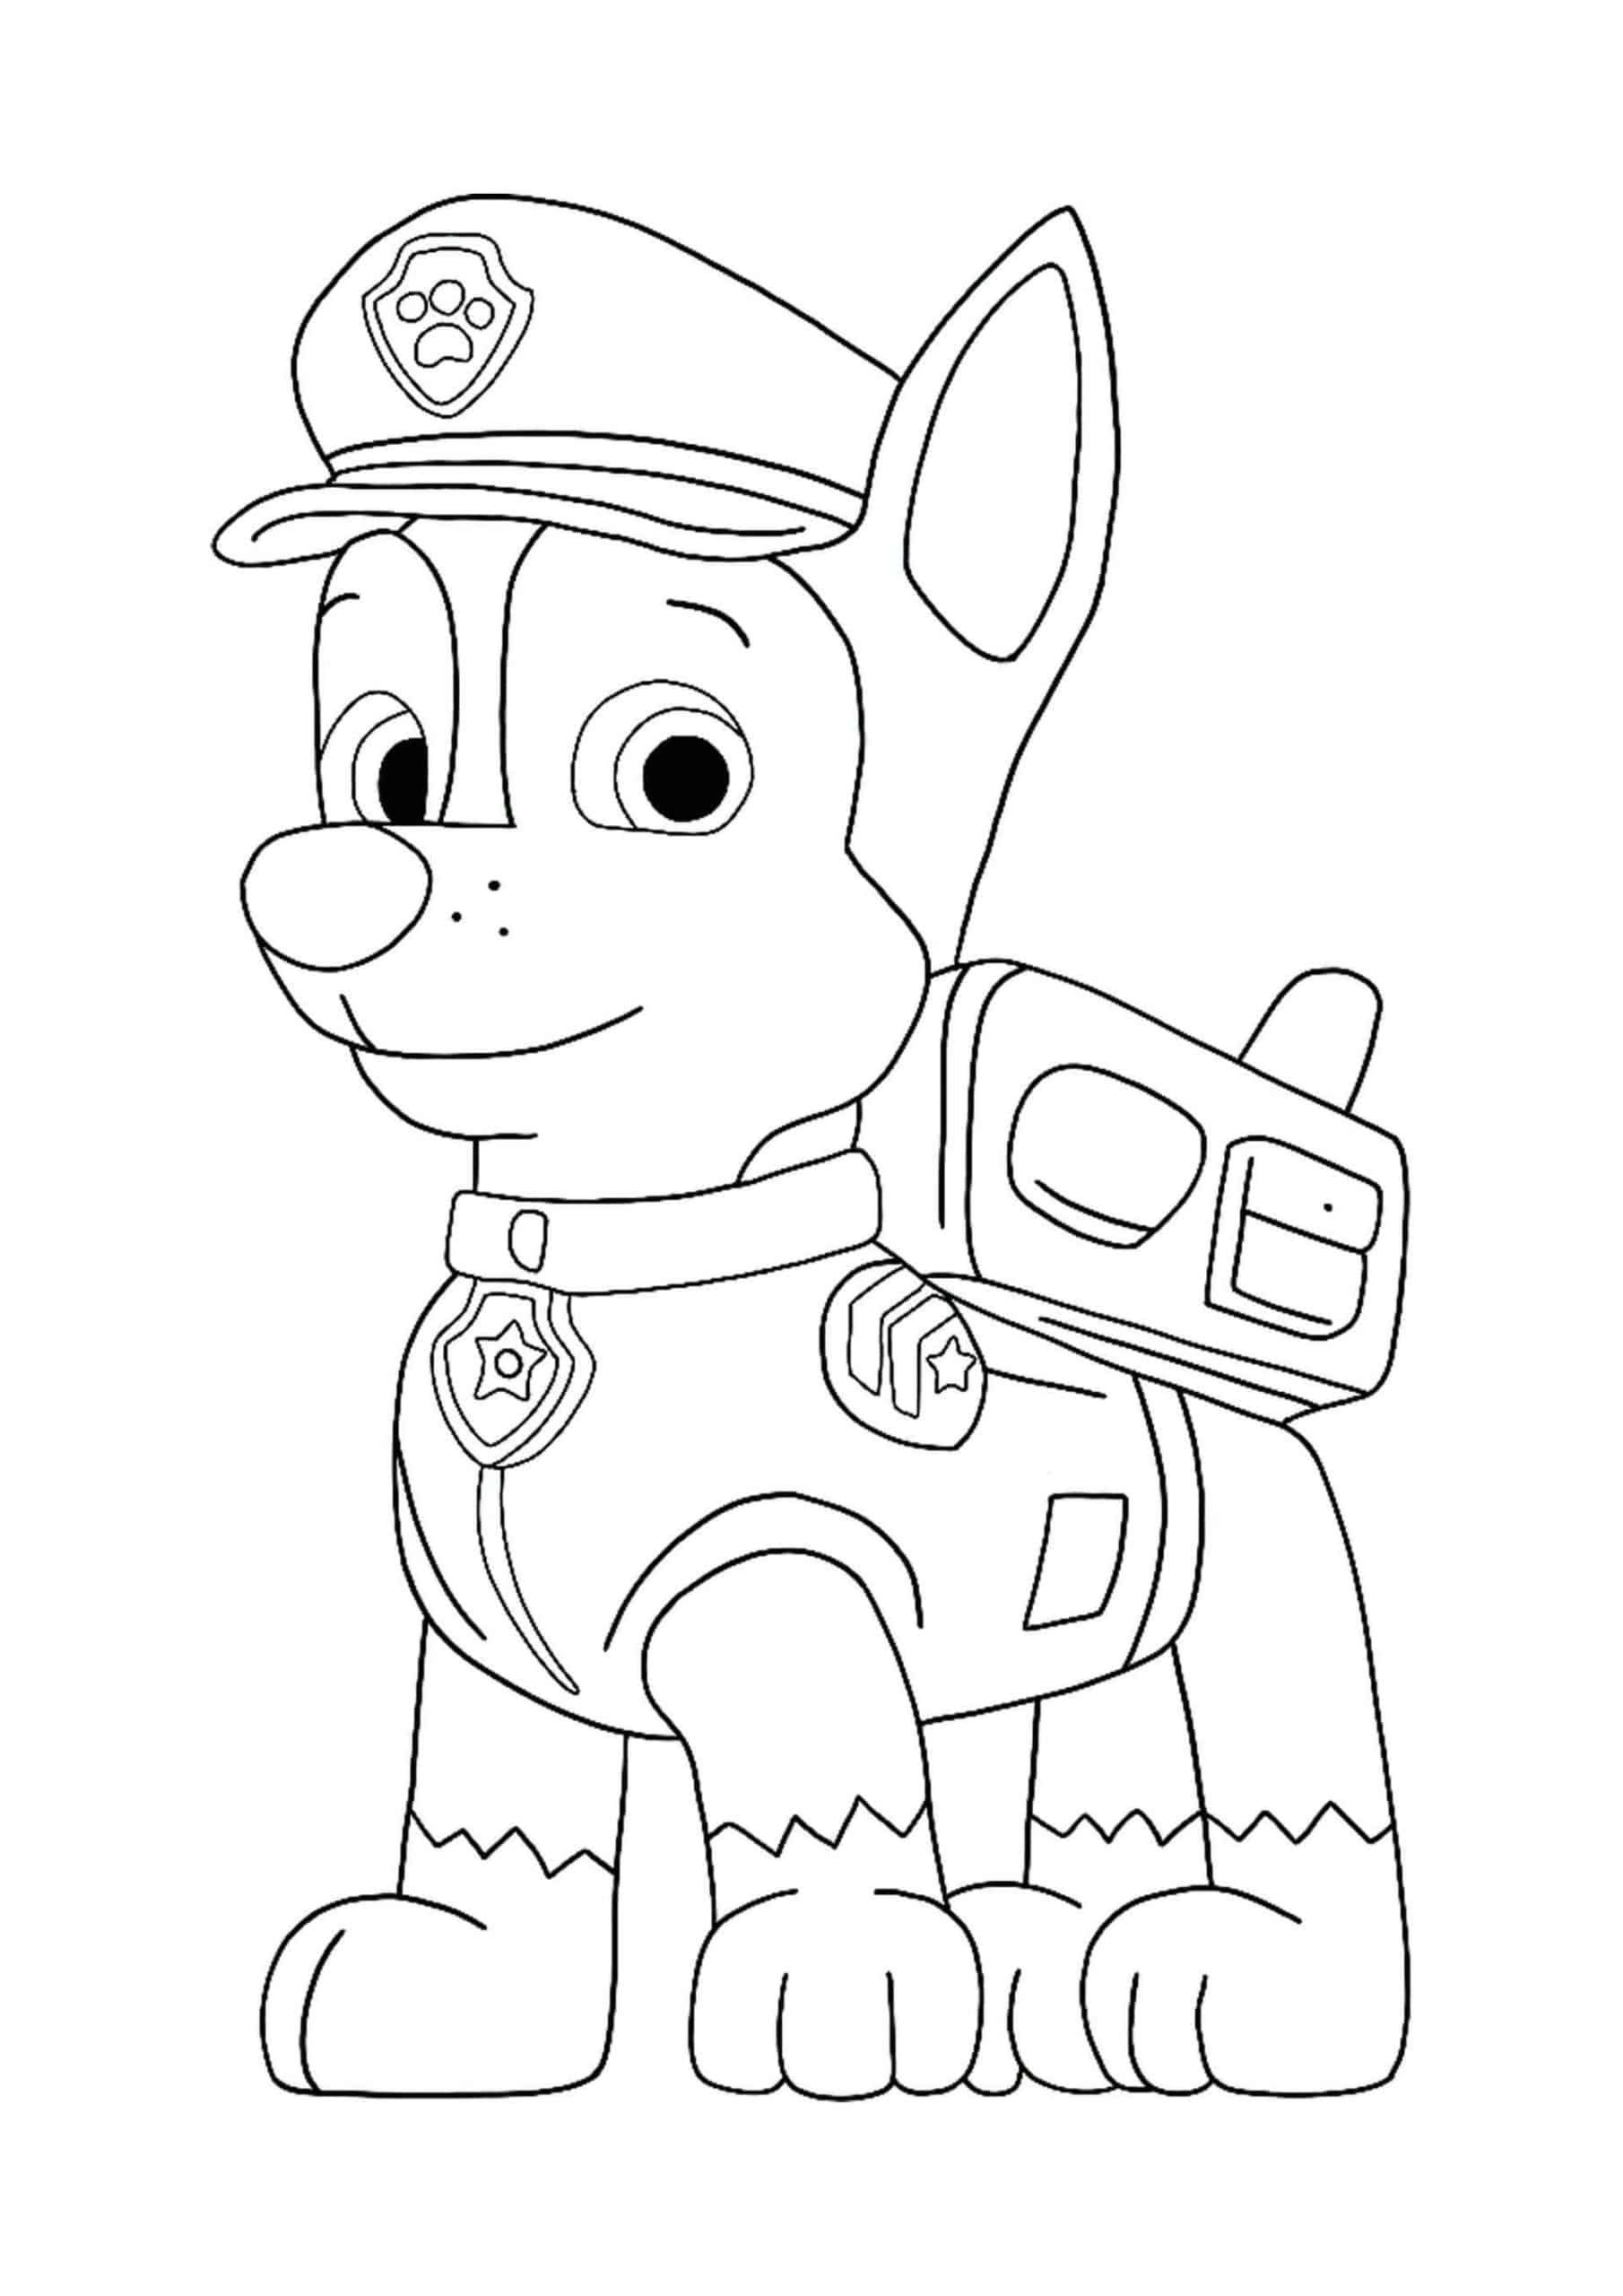 Paw Patrol Chase Coloring Page | Paw Patrol Coloring Pages, Paw Patrol à Chase Pat Patrouille Dessin Couleur